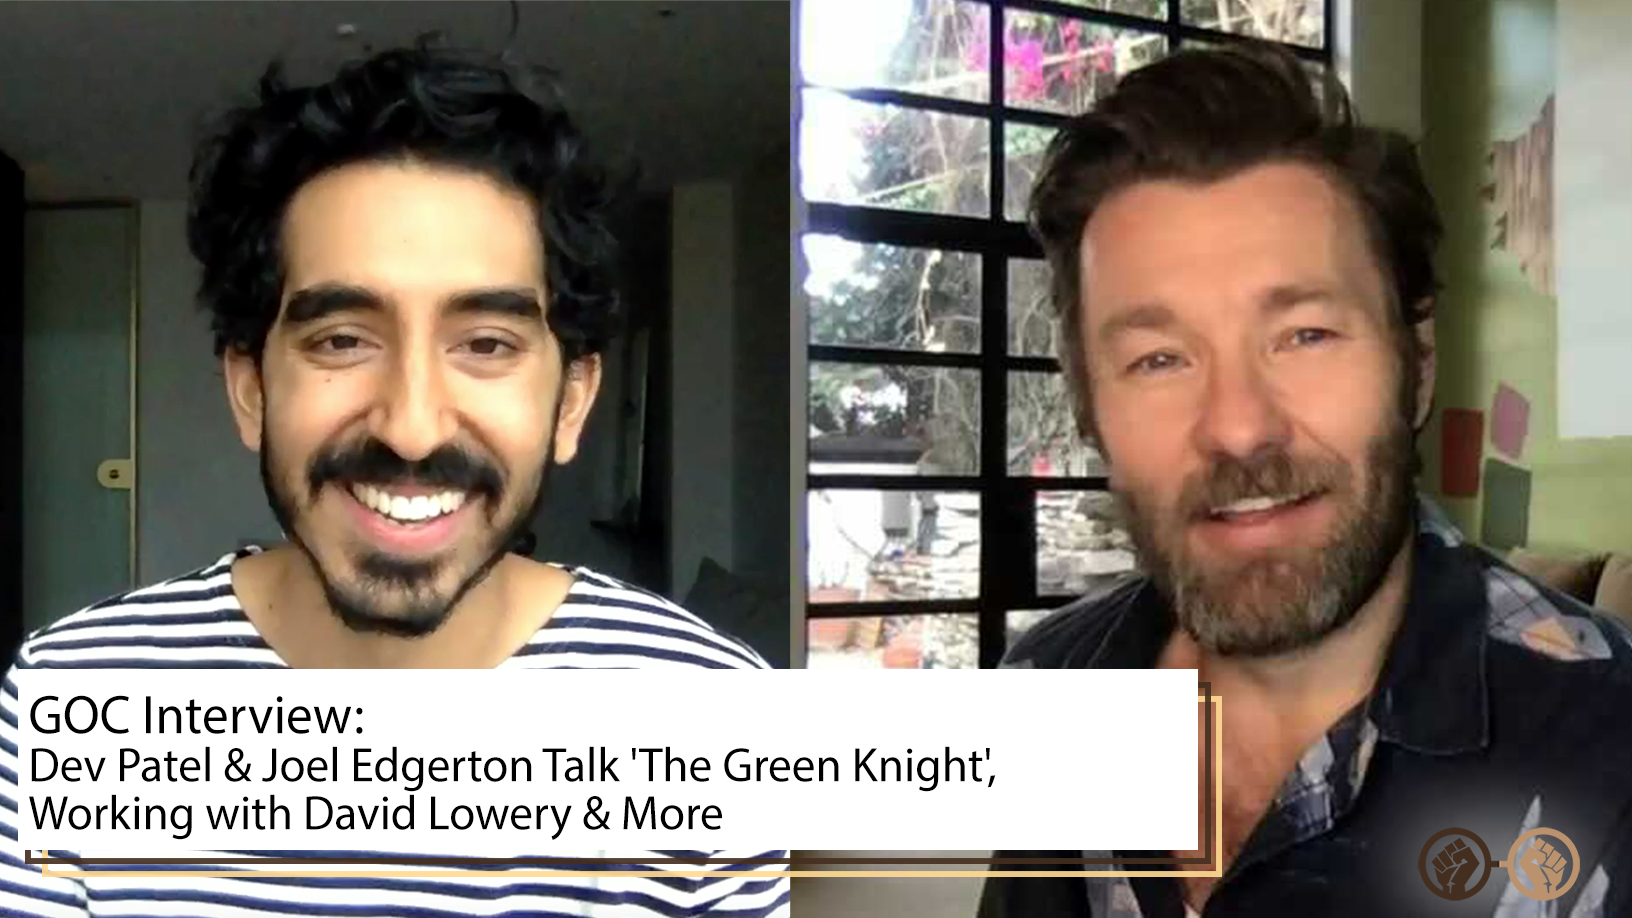 Interview: Dev Patel And Joel Edgerton Talk ‘The Green Knight’, Working With David Lowery & More